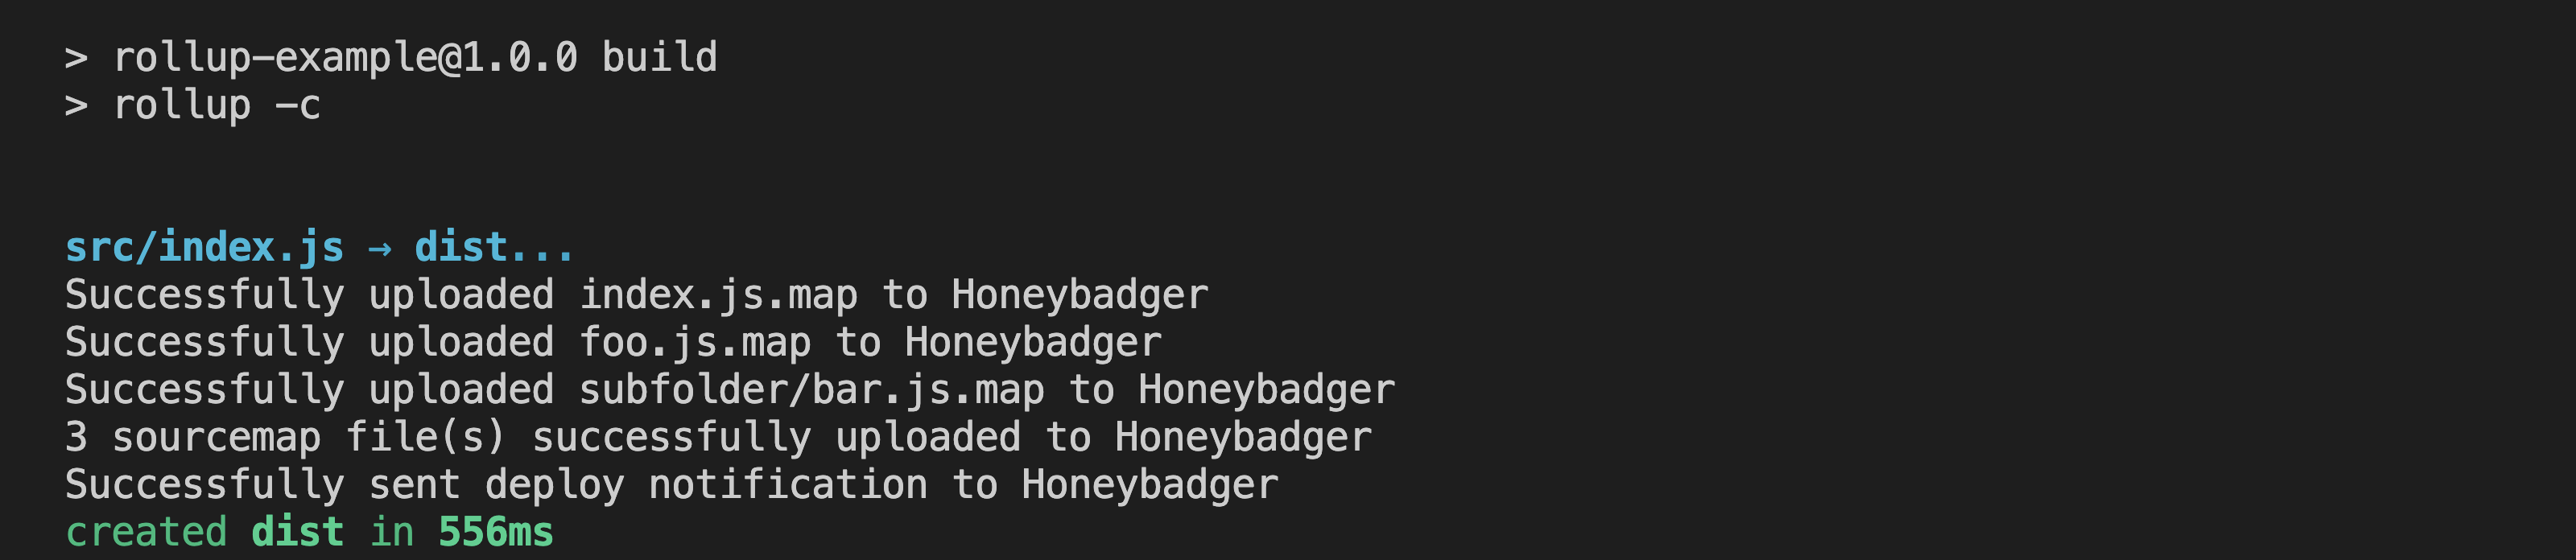 Terminal output: Successfully uploaded foo.js.map to Honeybadger